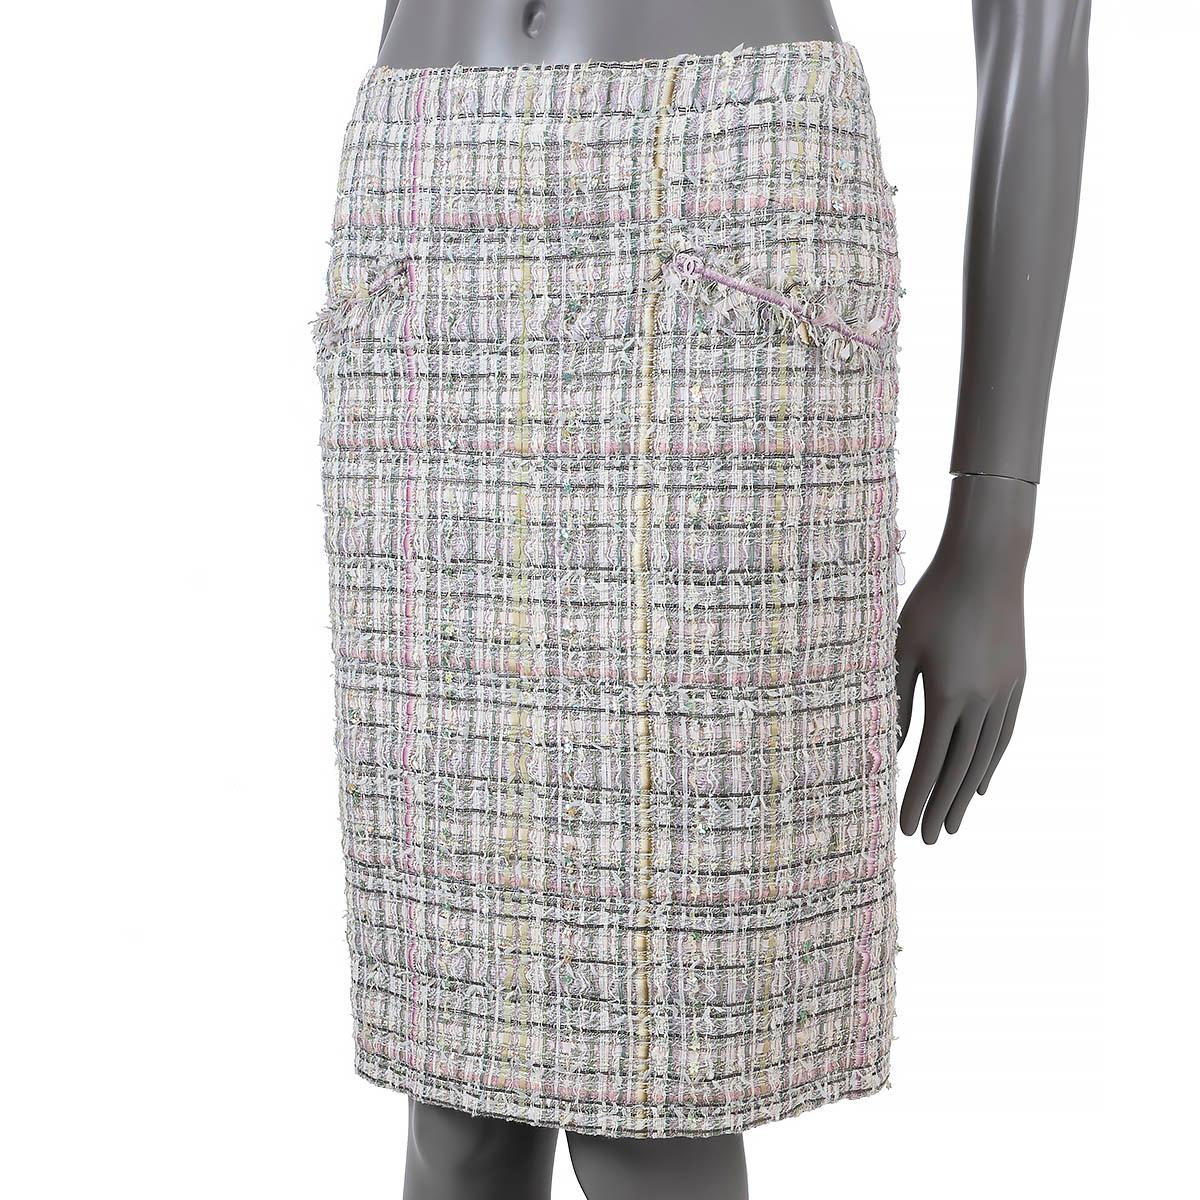 100% authentic Chanel tweed skirt in various shades of green and pink viscose (34%), nylon (25%), acetate (10%), acrylic (10%), polyester (8%), silk (5%), wool (5%) and vinyon (3%). Features clover sequins through-out, two fringe trimmed slit